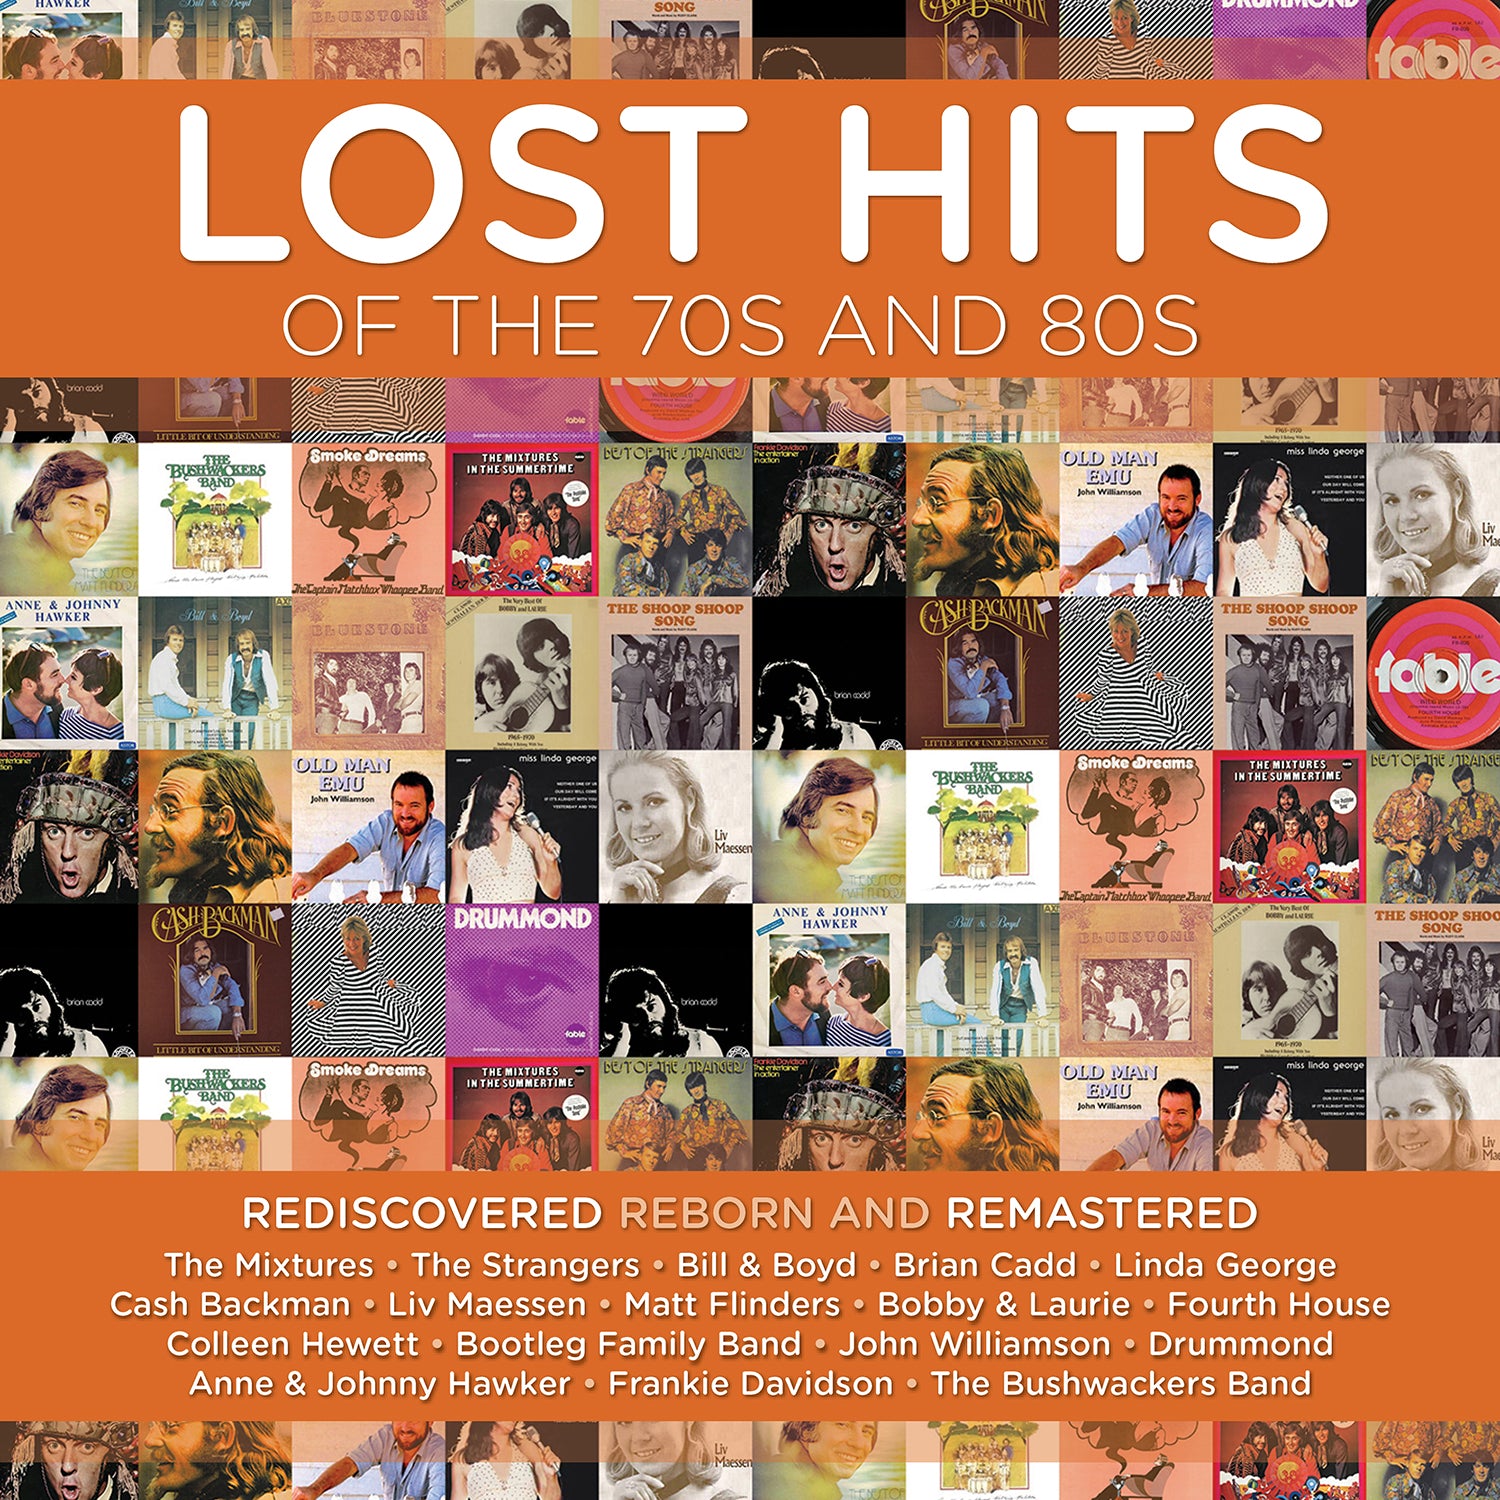 VARIOUS ARTISTS - LOST HITS OF THE 70S AND 80S